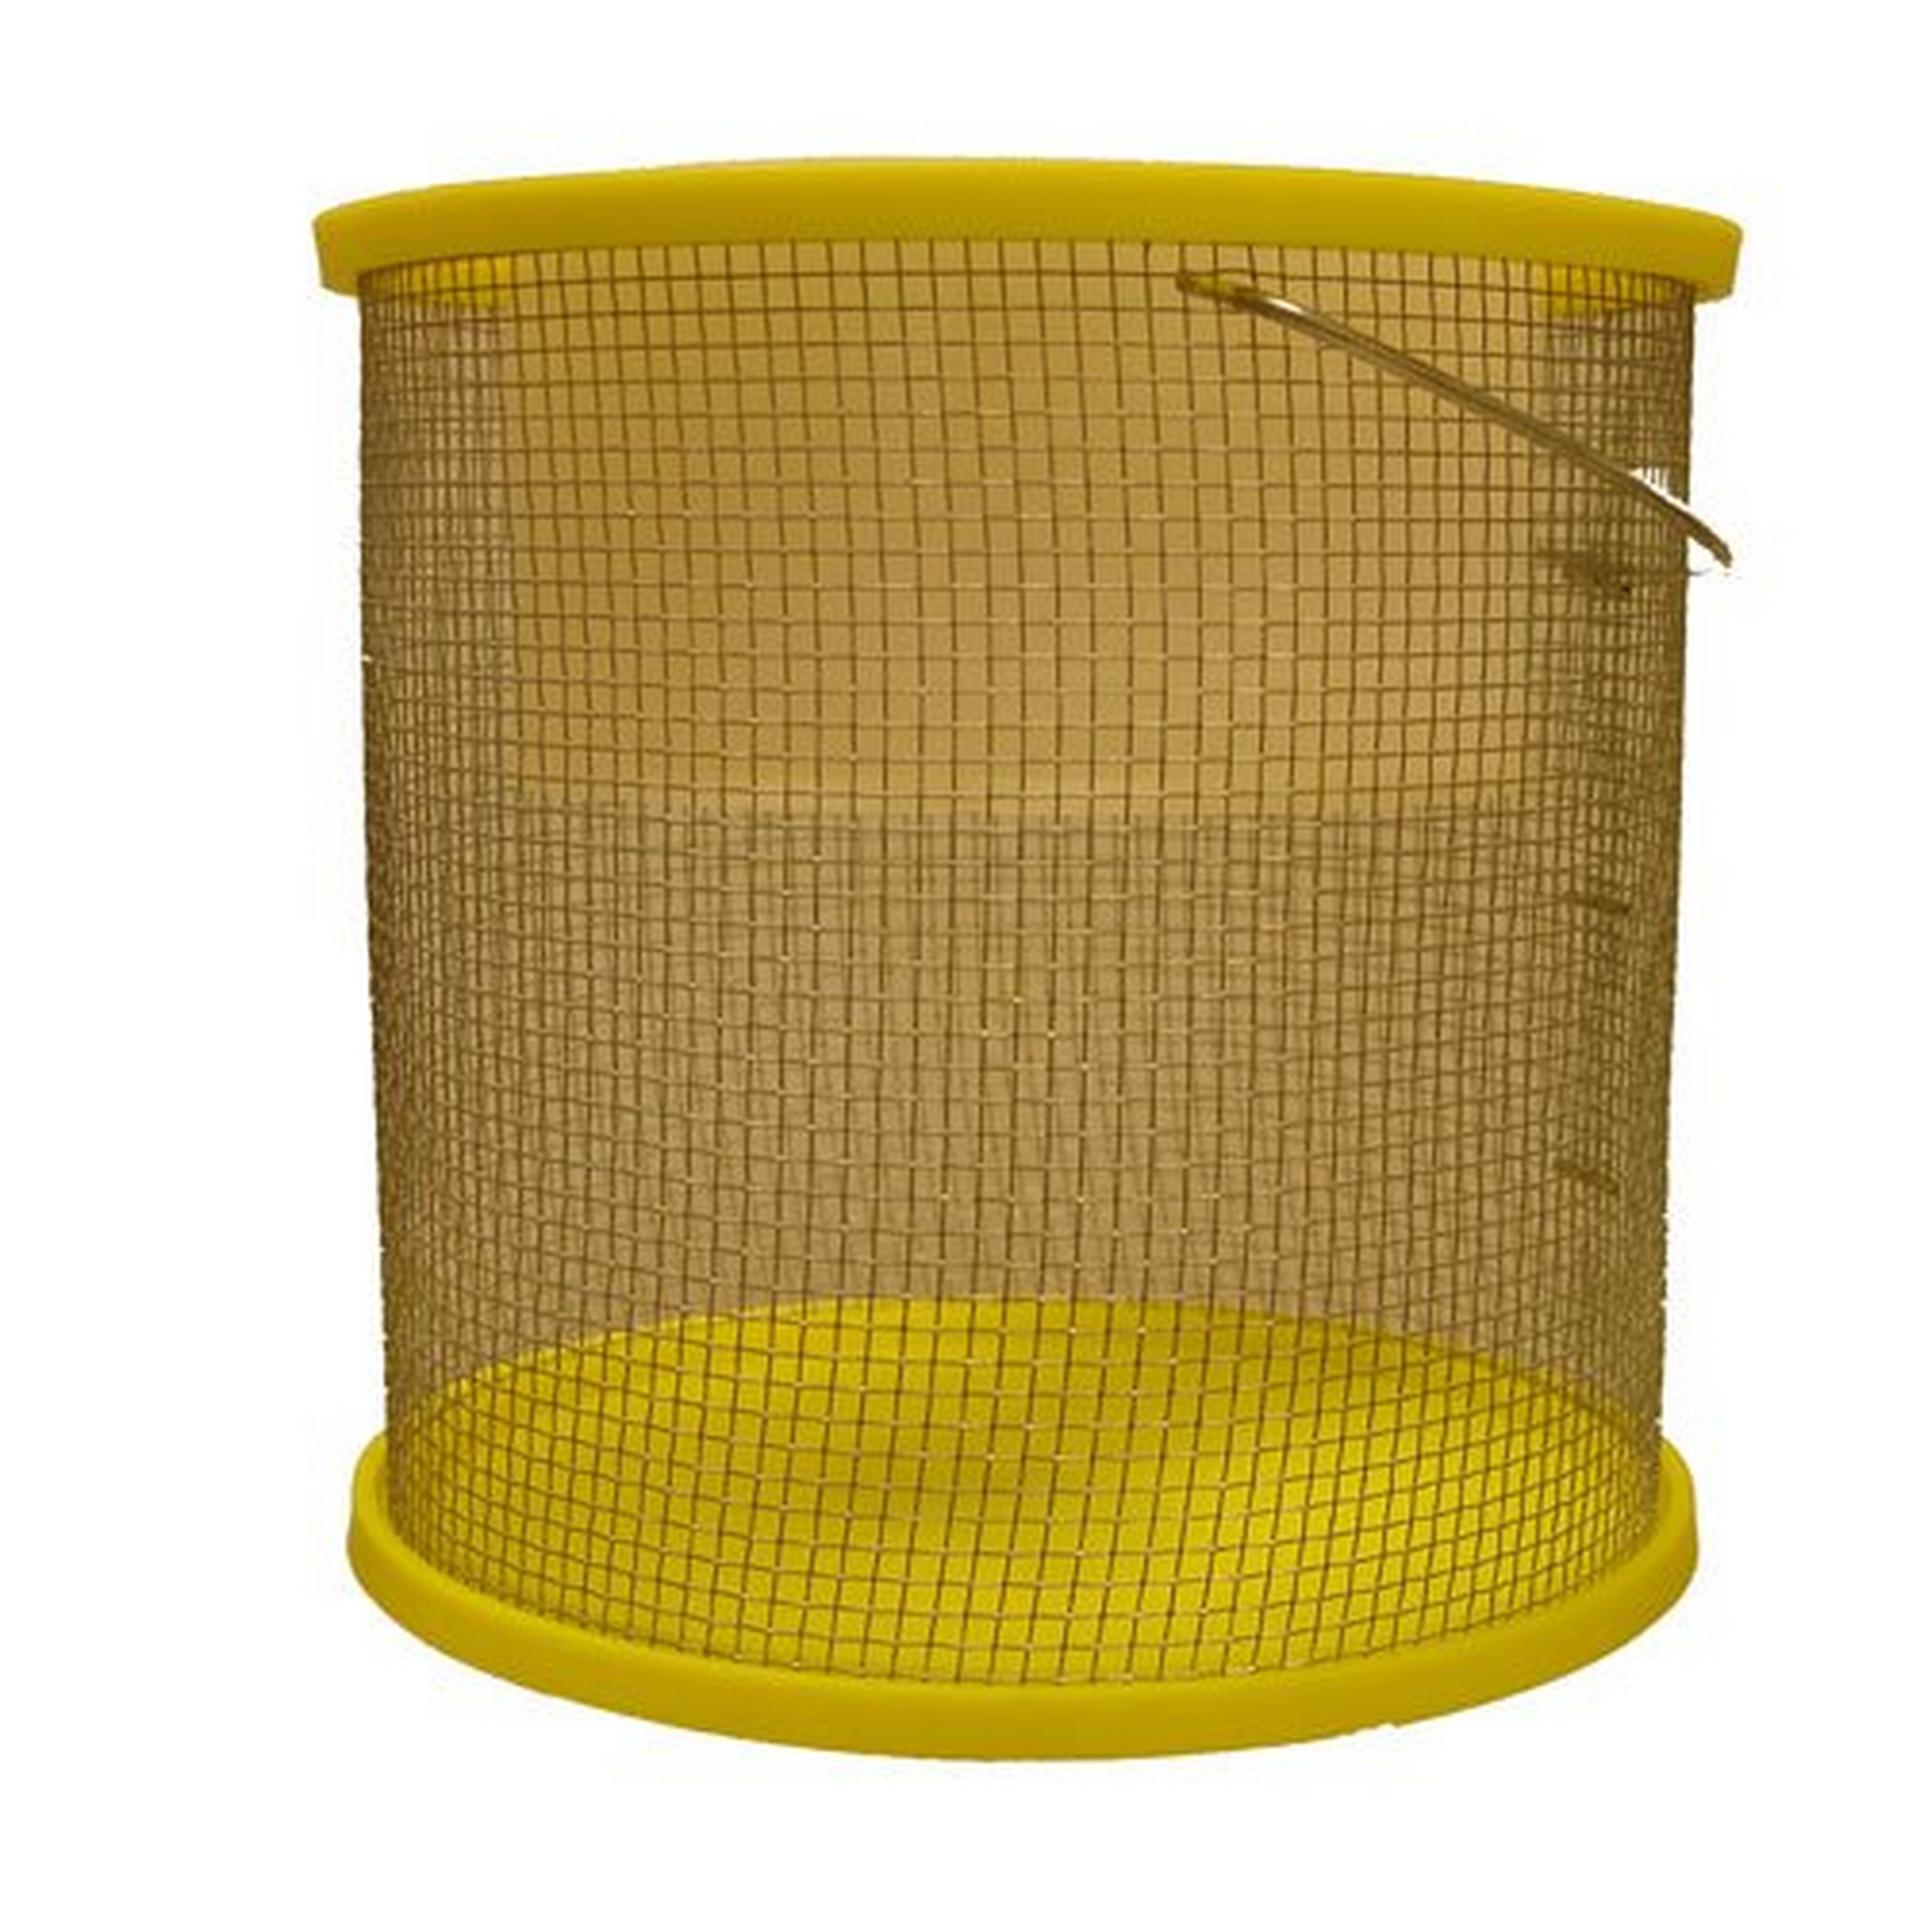 rebelFIN - 6.5 inch CRICKET TUBE - live bait fishing container cage cup